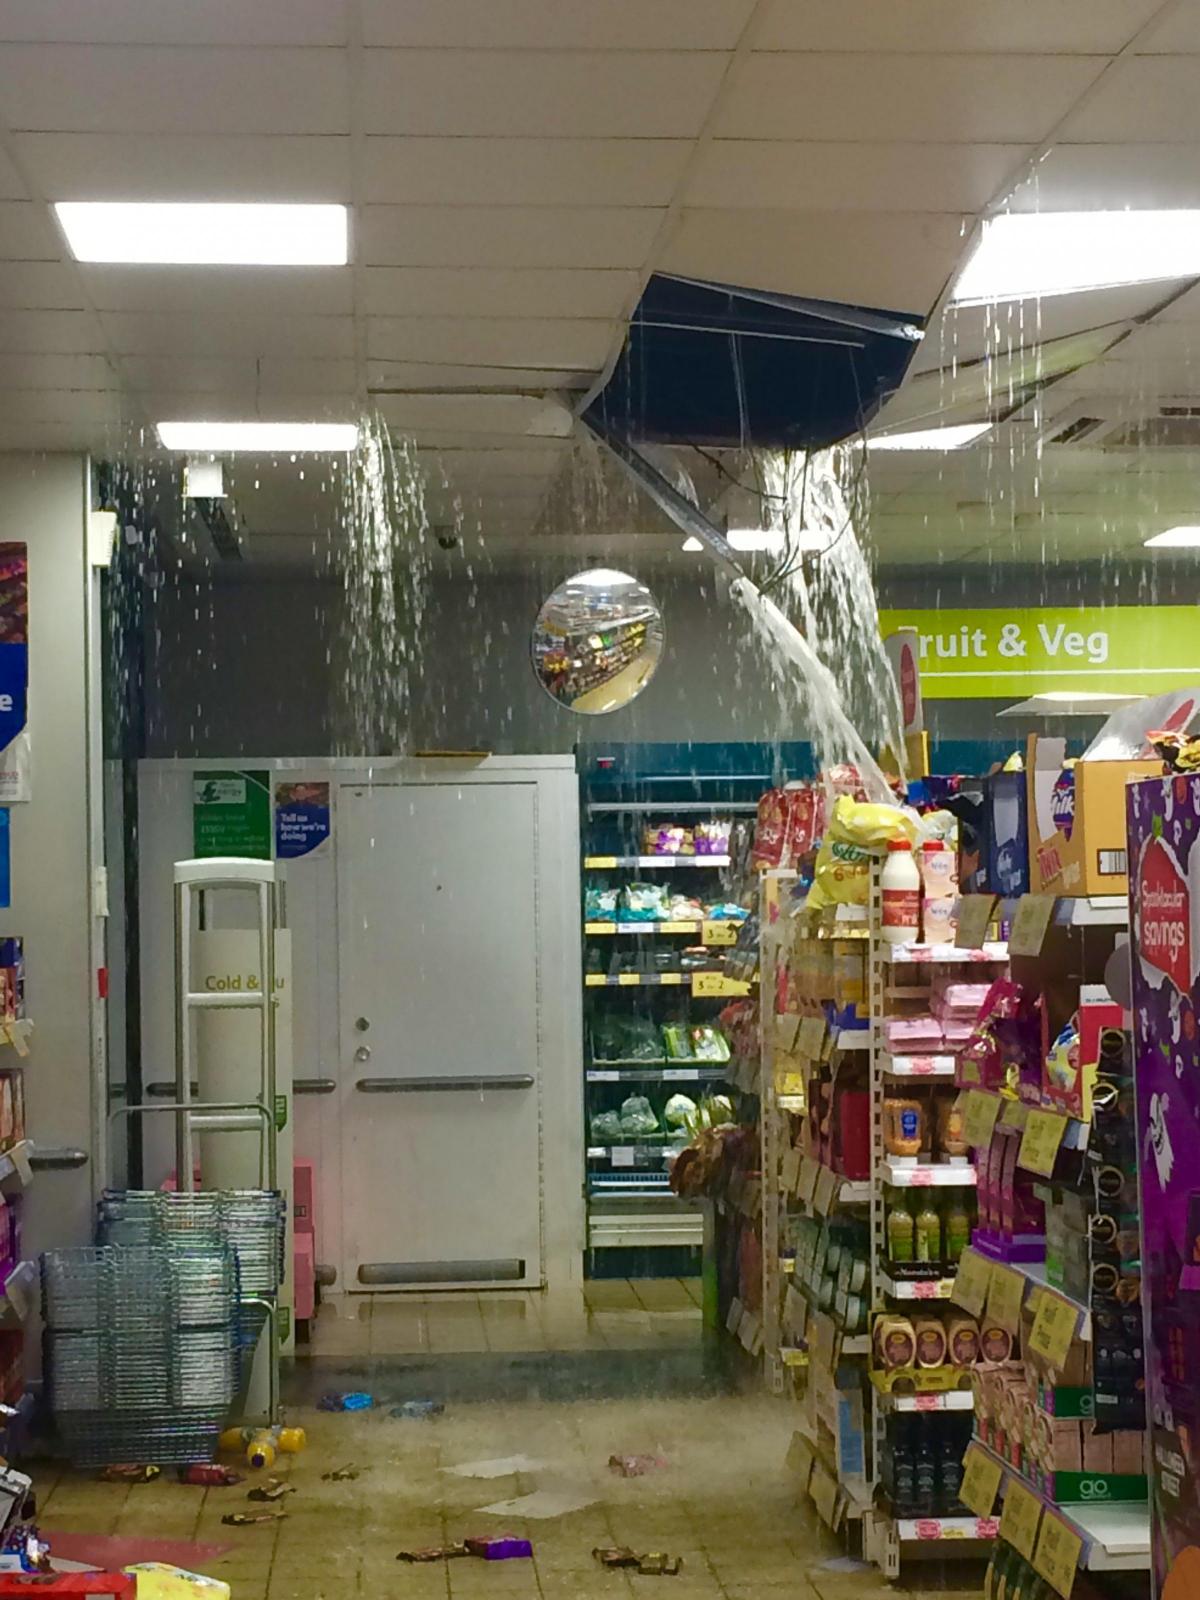 The ceiling of the Tesco Express in Jubilee Street in Brighton collapses as rainwater pours through. Picture by Cat Smith